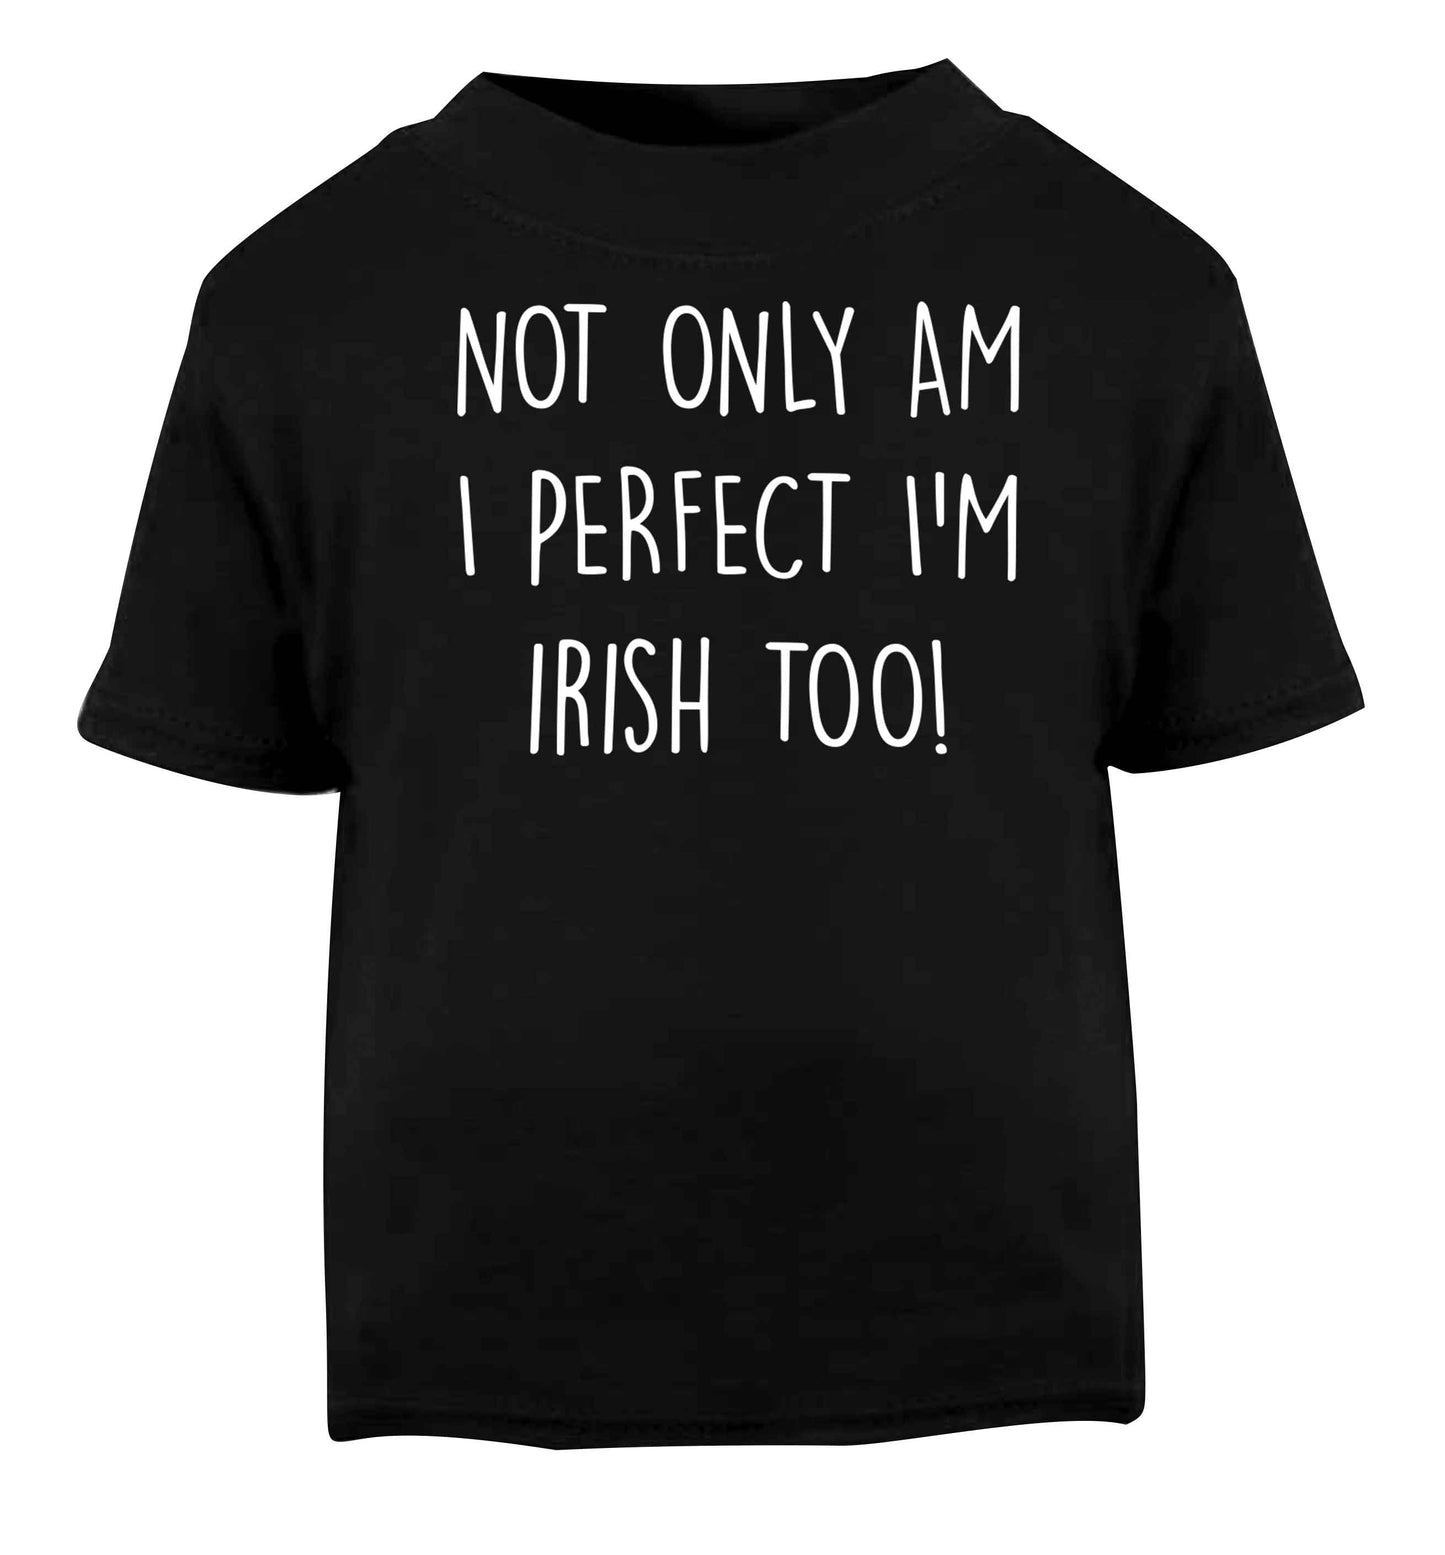 Not only am I perfect I'm Irish too! Black baby toddler Tshirt 2 years